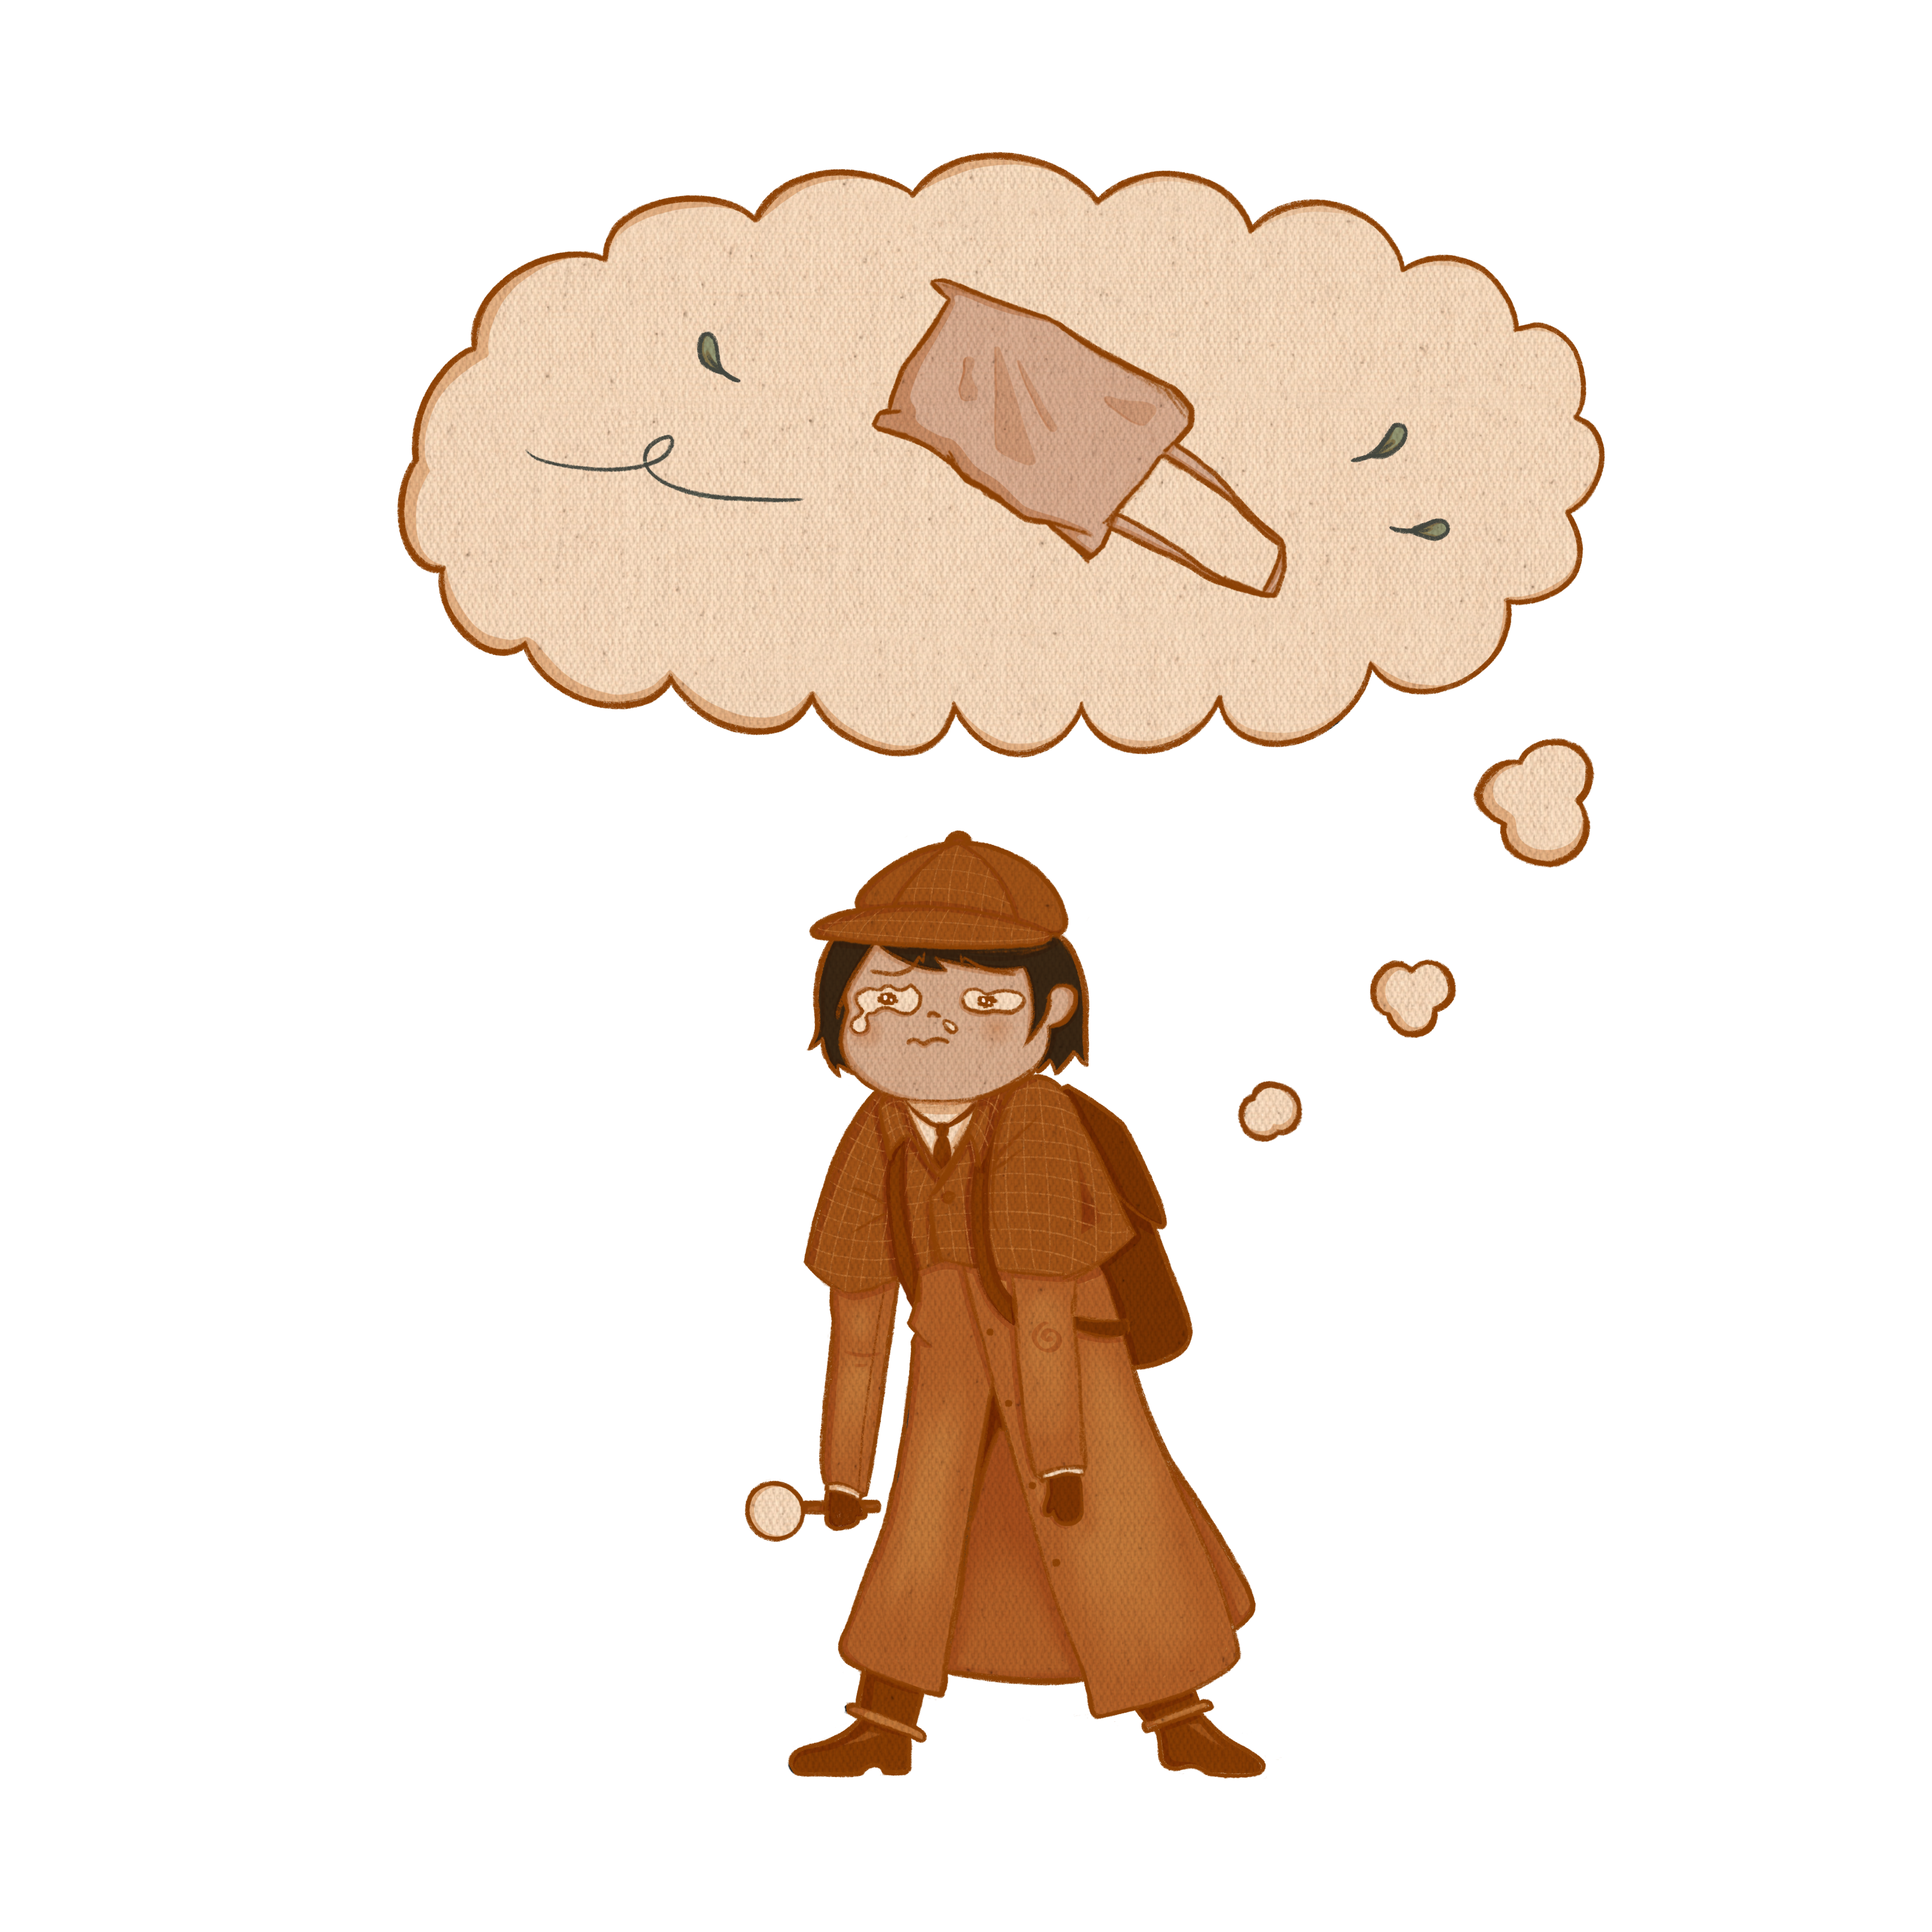 Illustration of a sad student dressed in brown detective clothing, reminiscent of Sherlock Holmes, with a thought bubble of their tote bag.